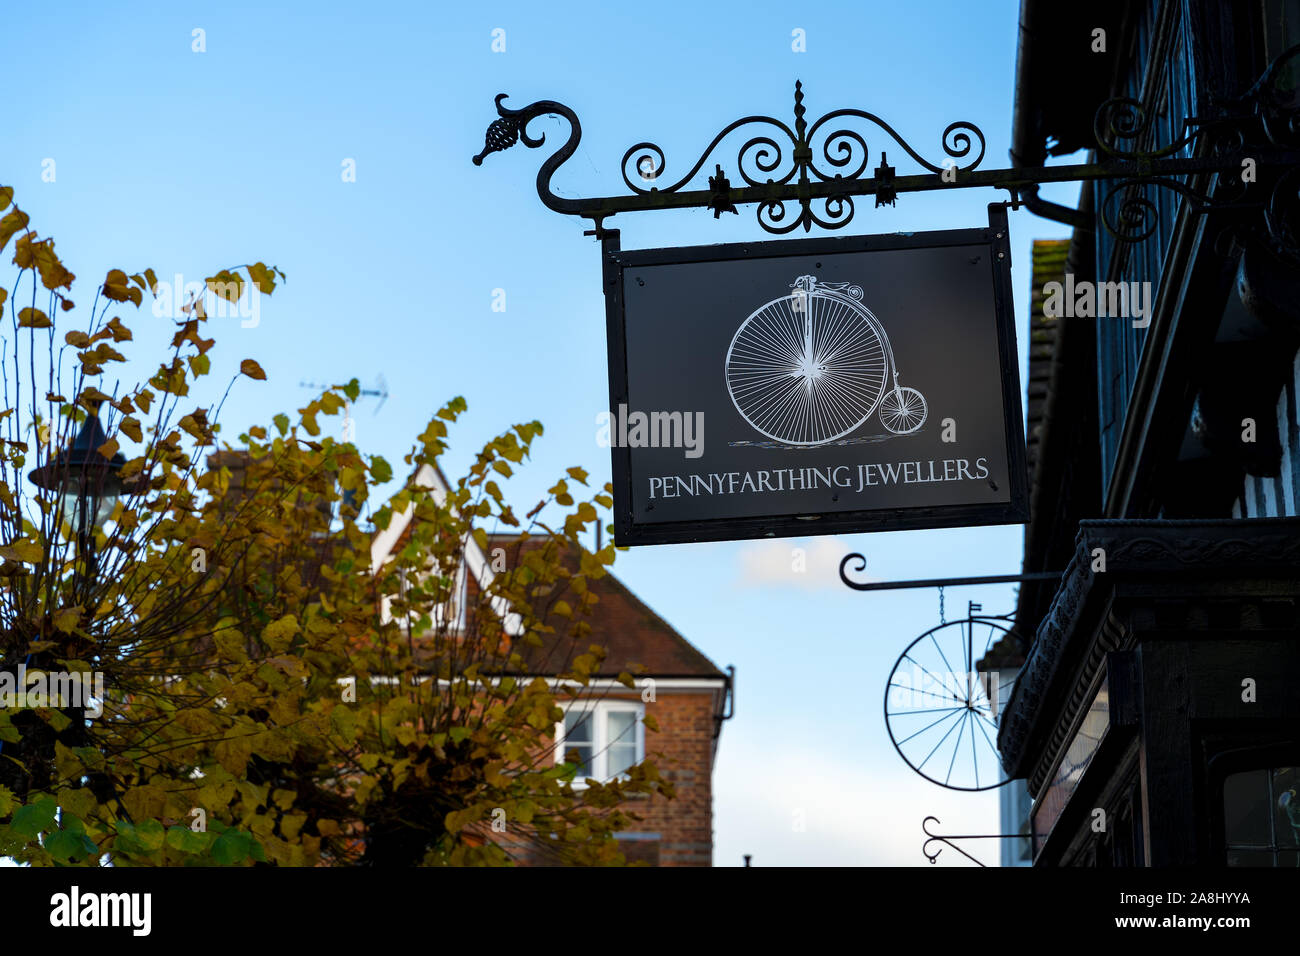 EAST GRINSTEAD, WEST SUSSEX/UK - 7 novembre : Insegna per Penny Farthing gioiellieri a East Grinstead West Sussex il 7 novembre 2019 Foto Stock